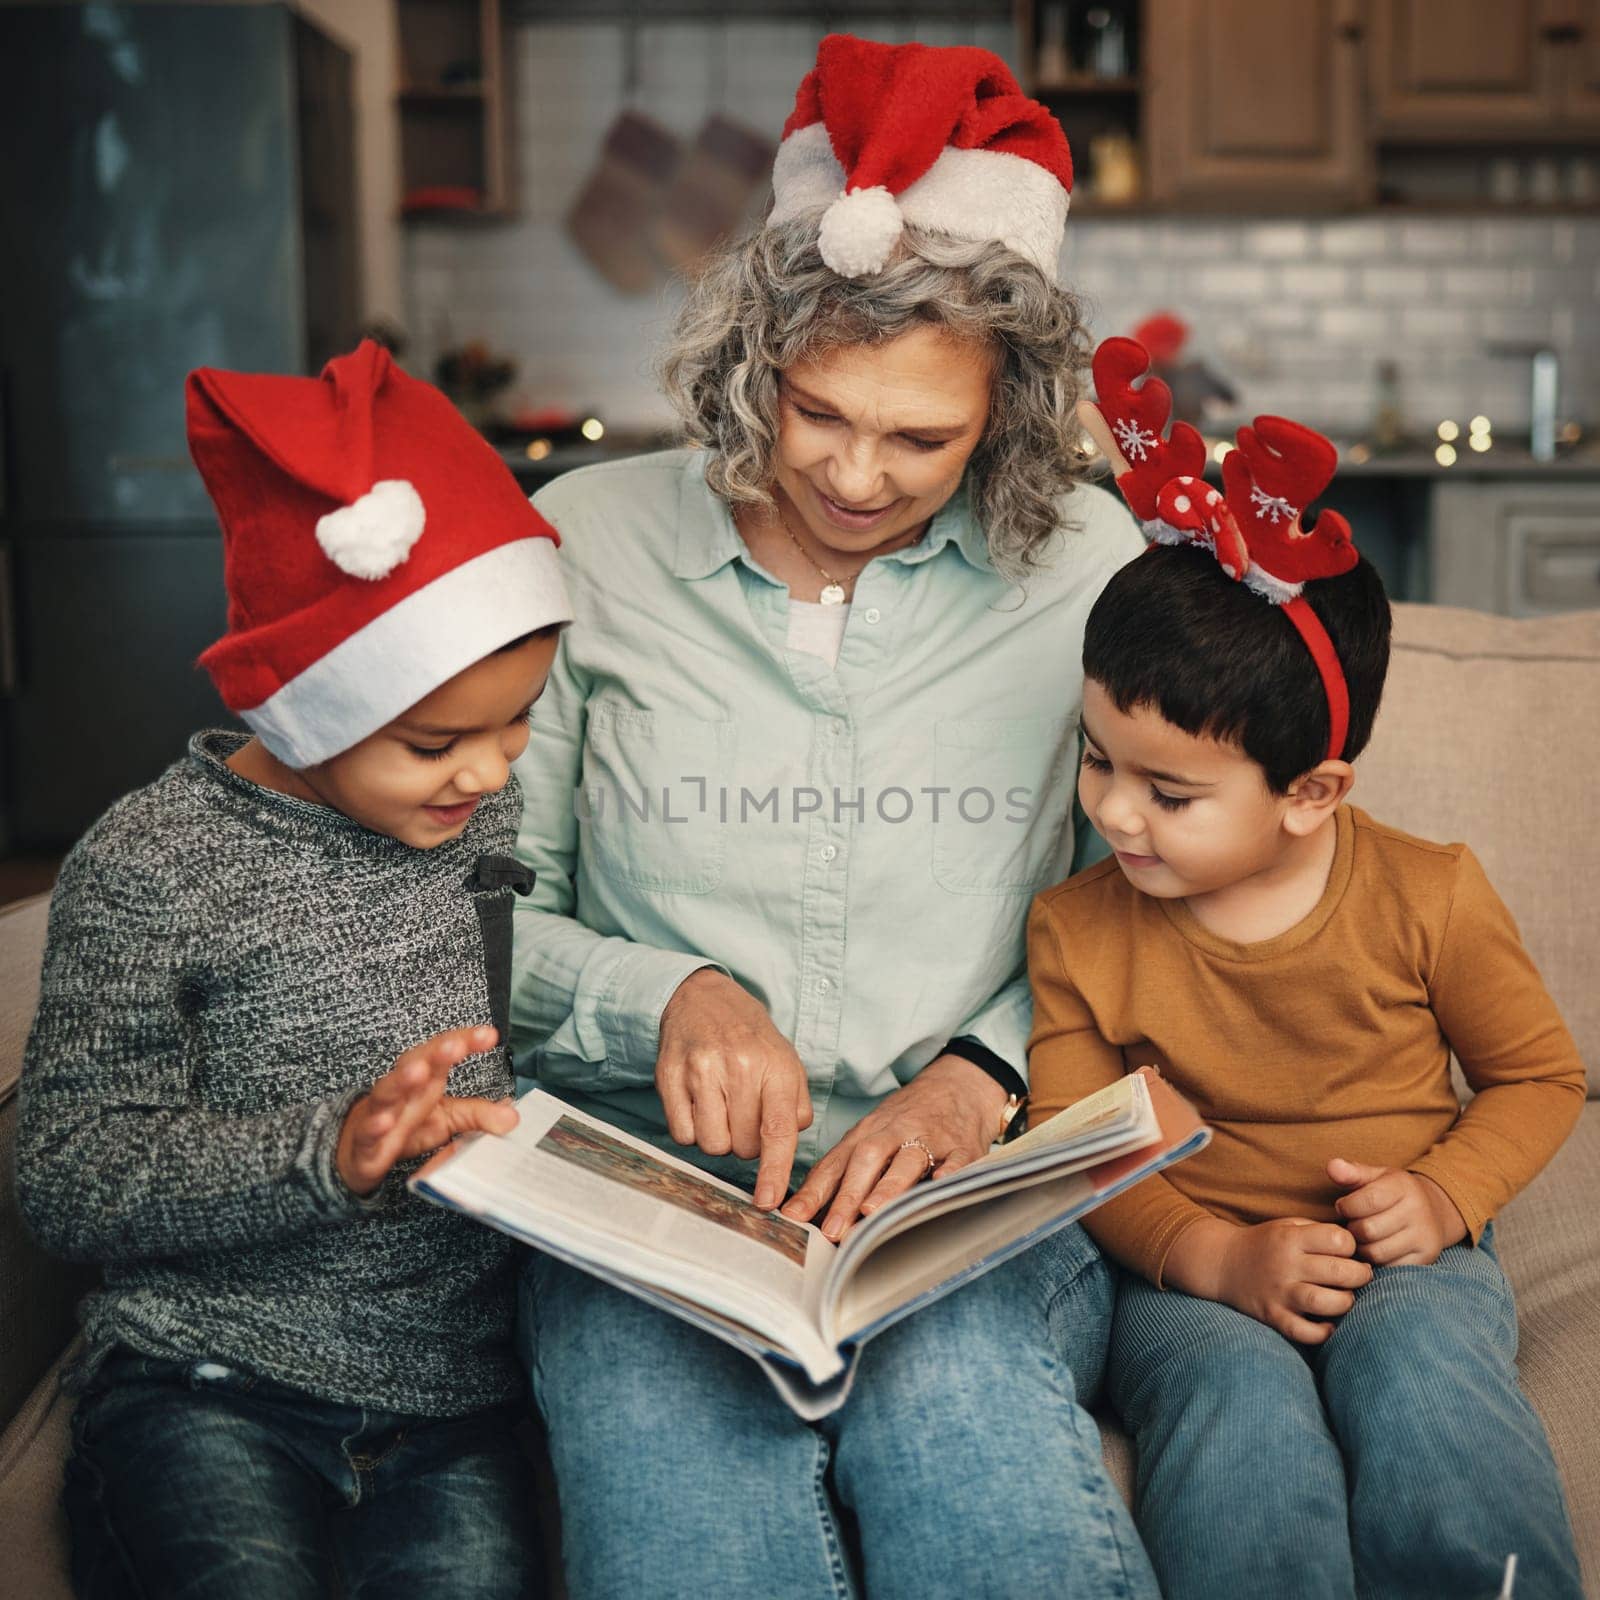 Christmas, books or reading with a grandmother and kids looking at photographs during festive season. Family, love or celebration with a senior woman and grandchildren holding a story book by YuriArcurs